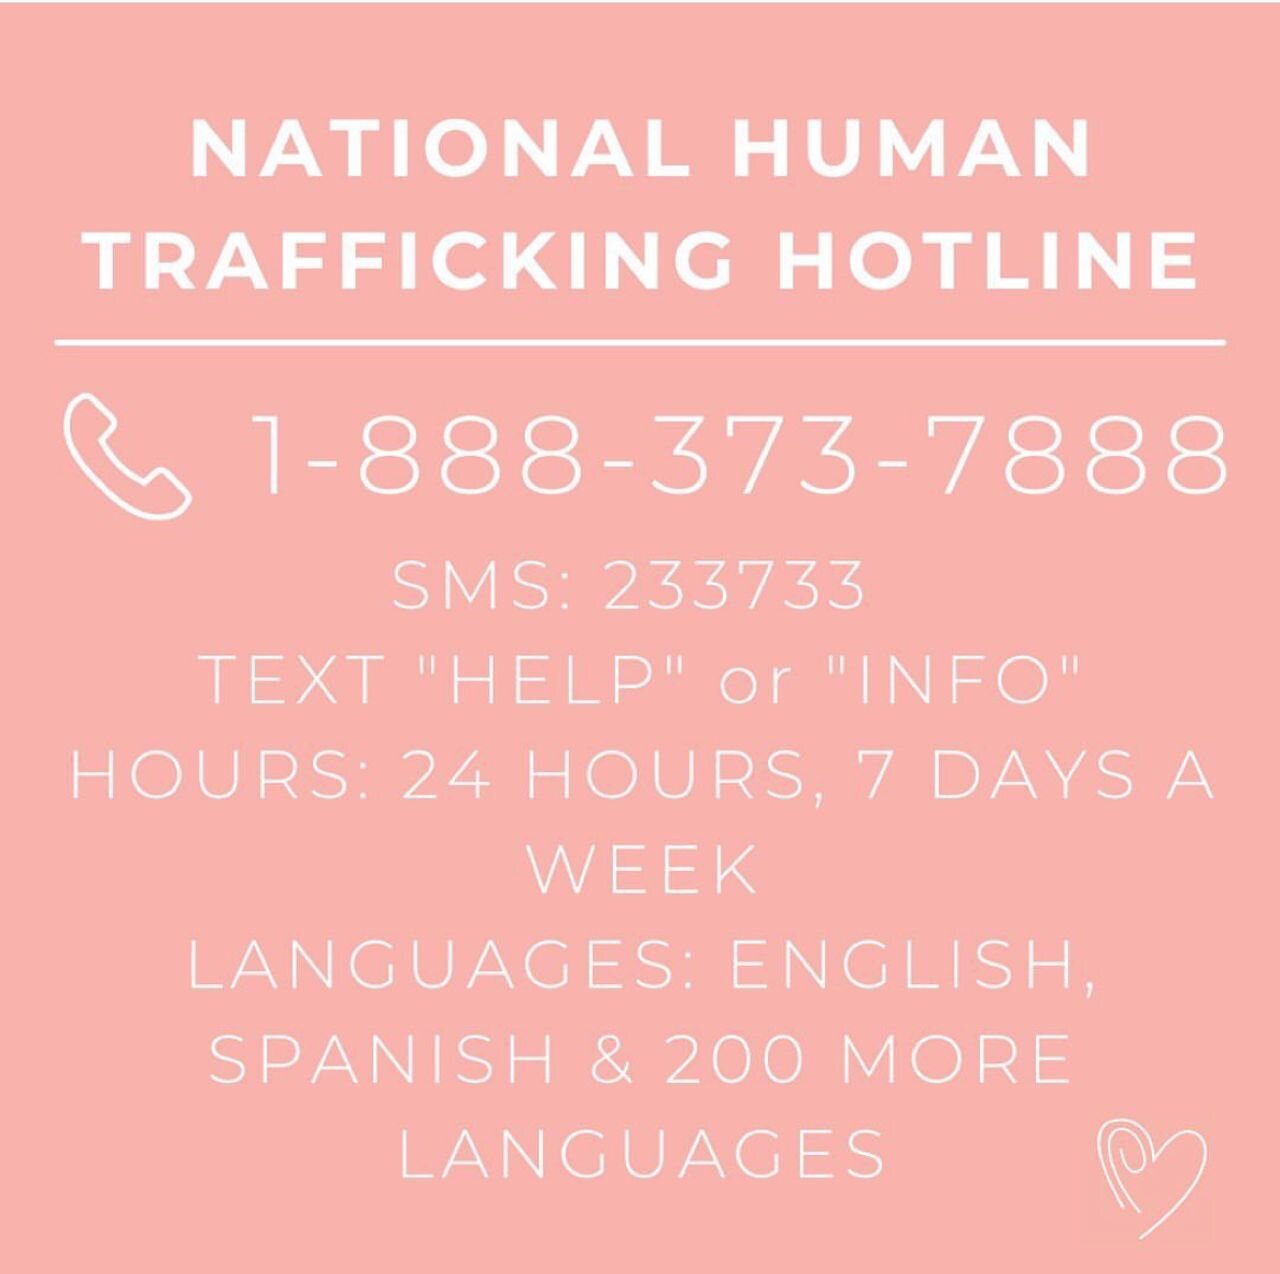 The hotline is a telephone and web servcice that members of the public can call to report suspected cases of trafficking, survivors can call for help, or interested persons can contact for trafficking information. 

The toll-free phone and SMS text l